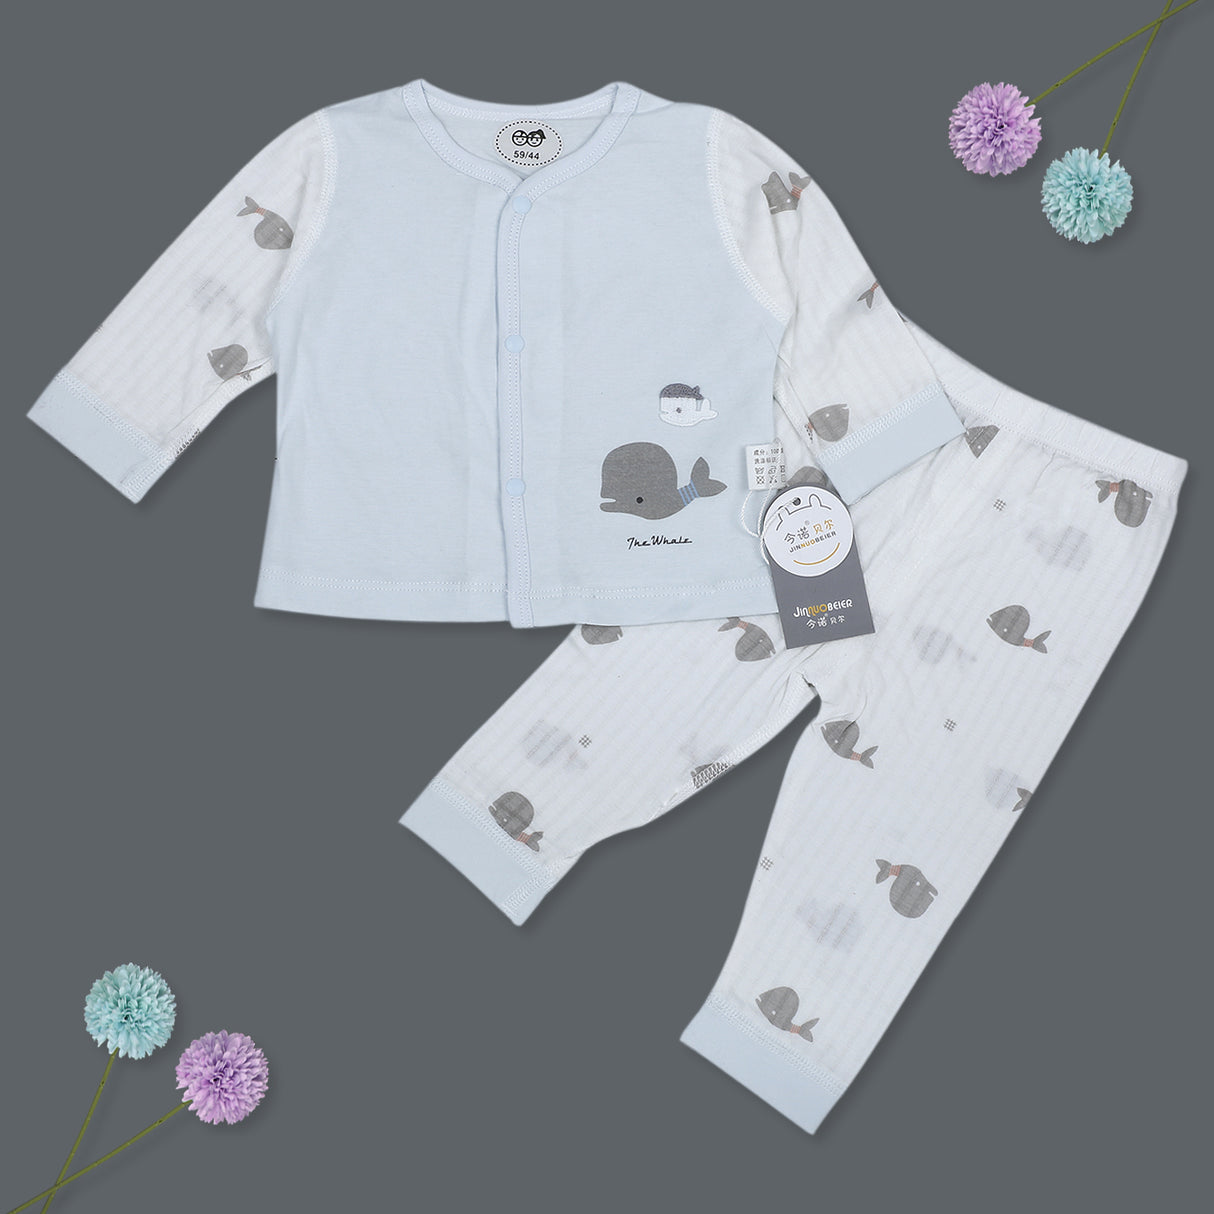 Whale Full Sleeves Top And Pyjama Buttoned Night Suit